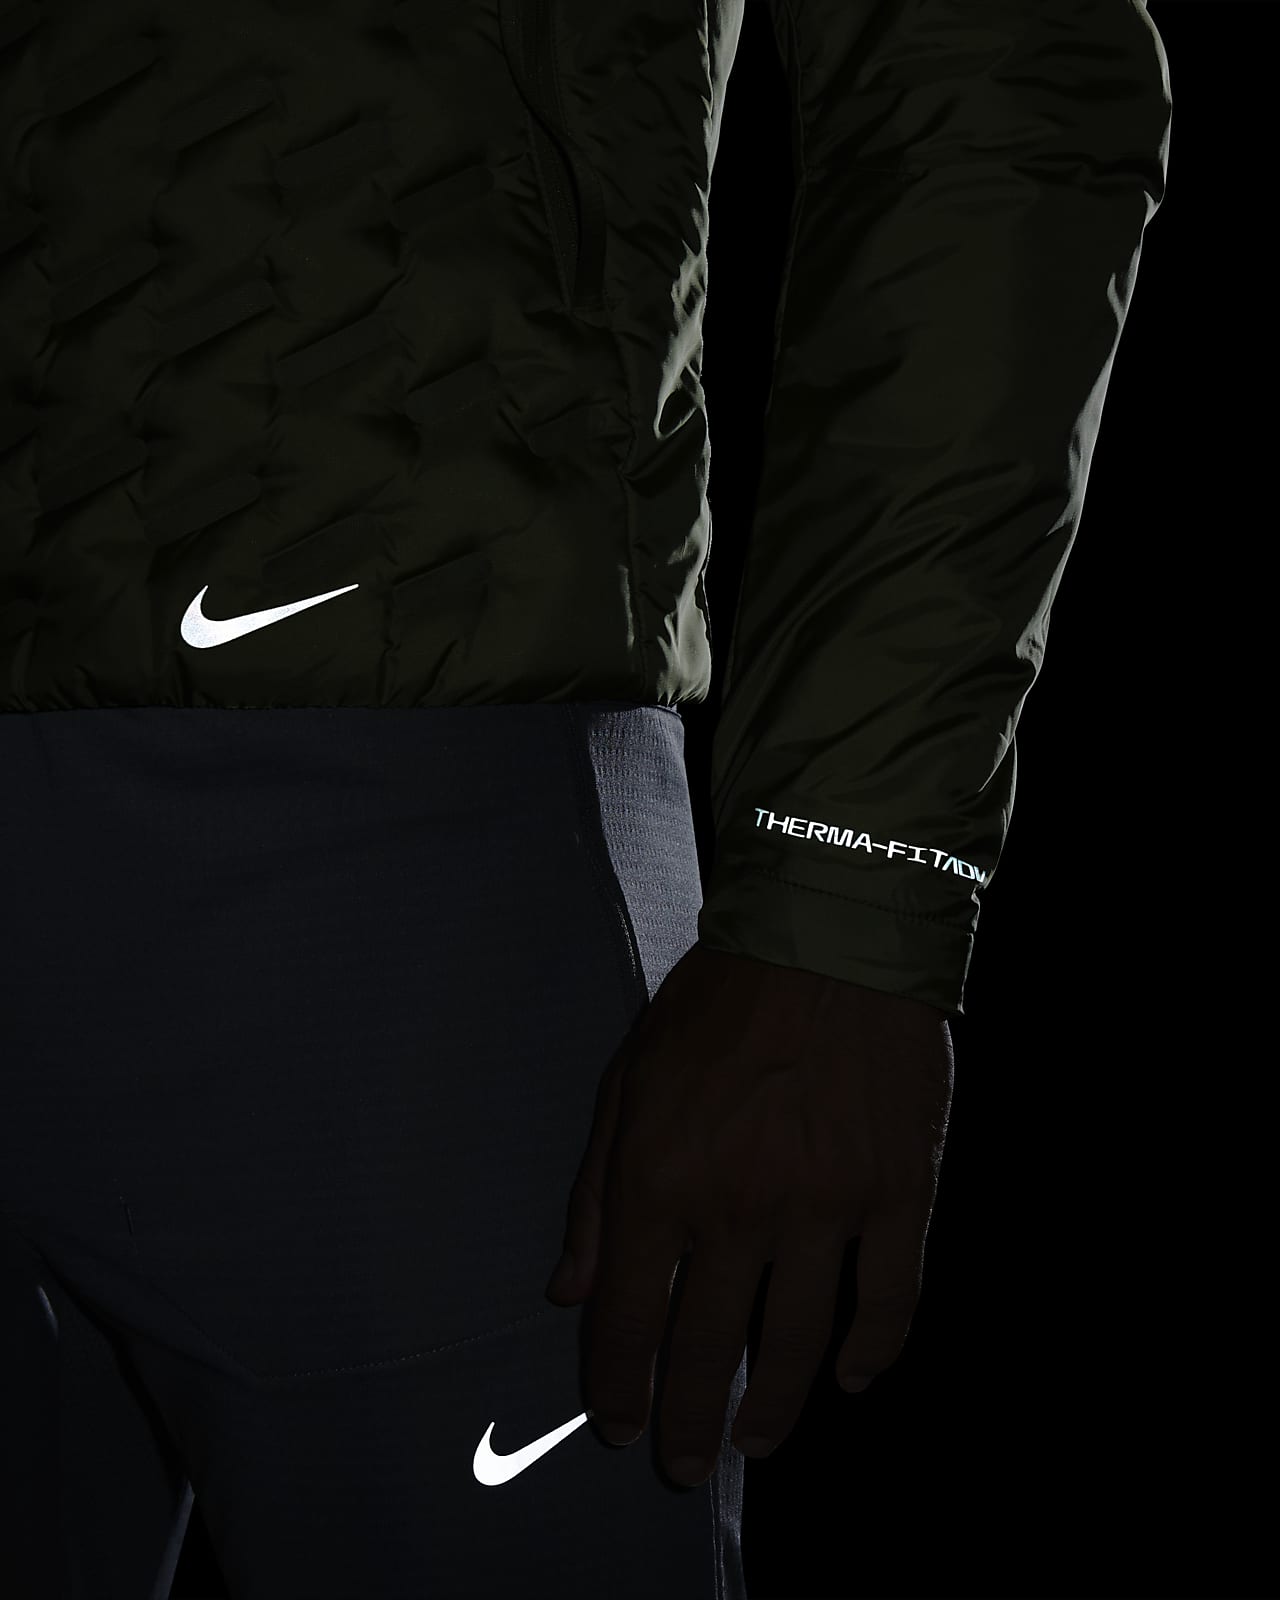 NIKE Therma-fit ADV running jacket